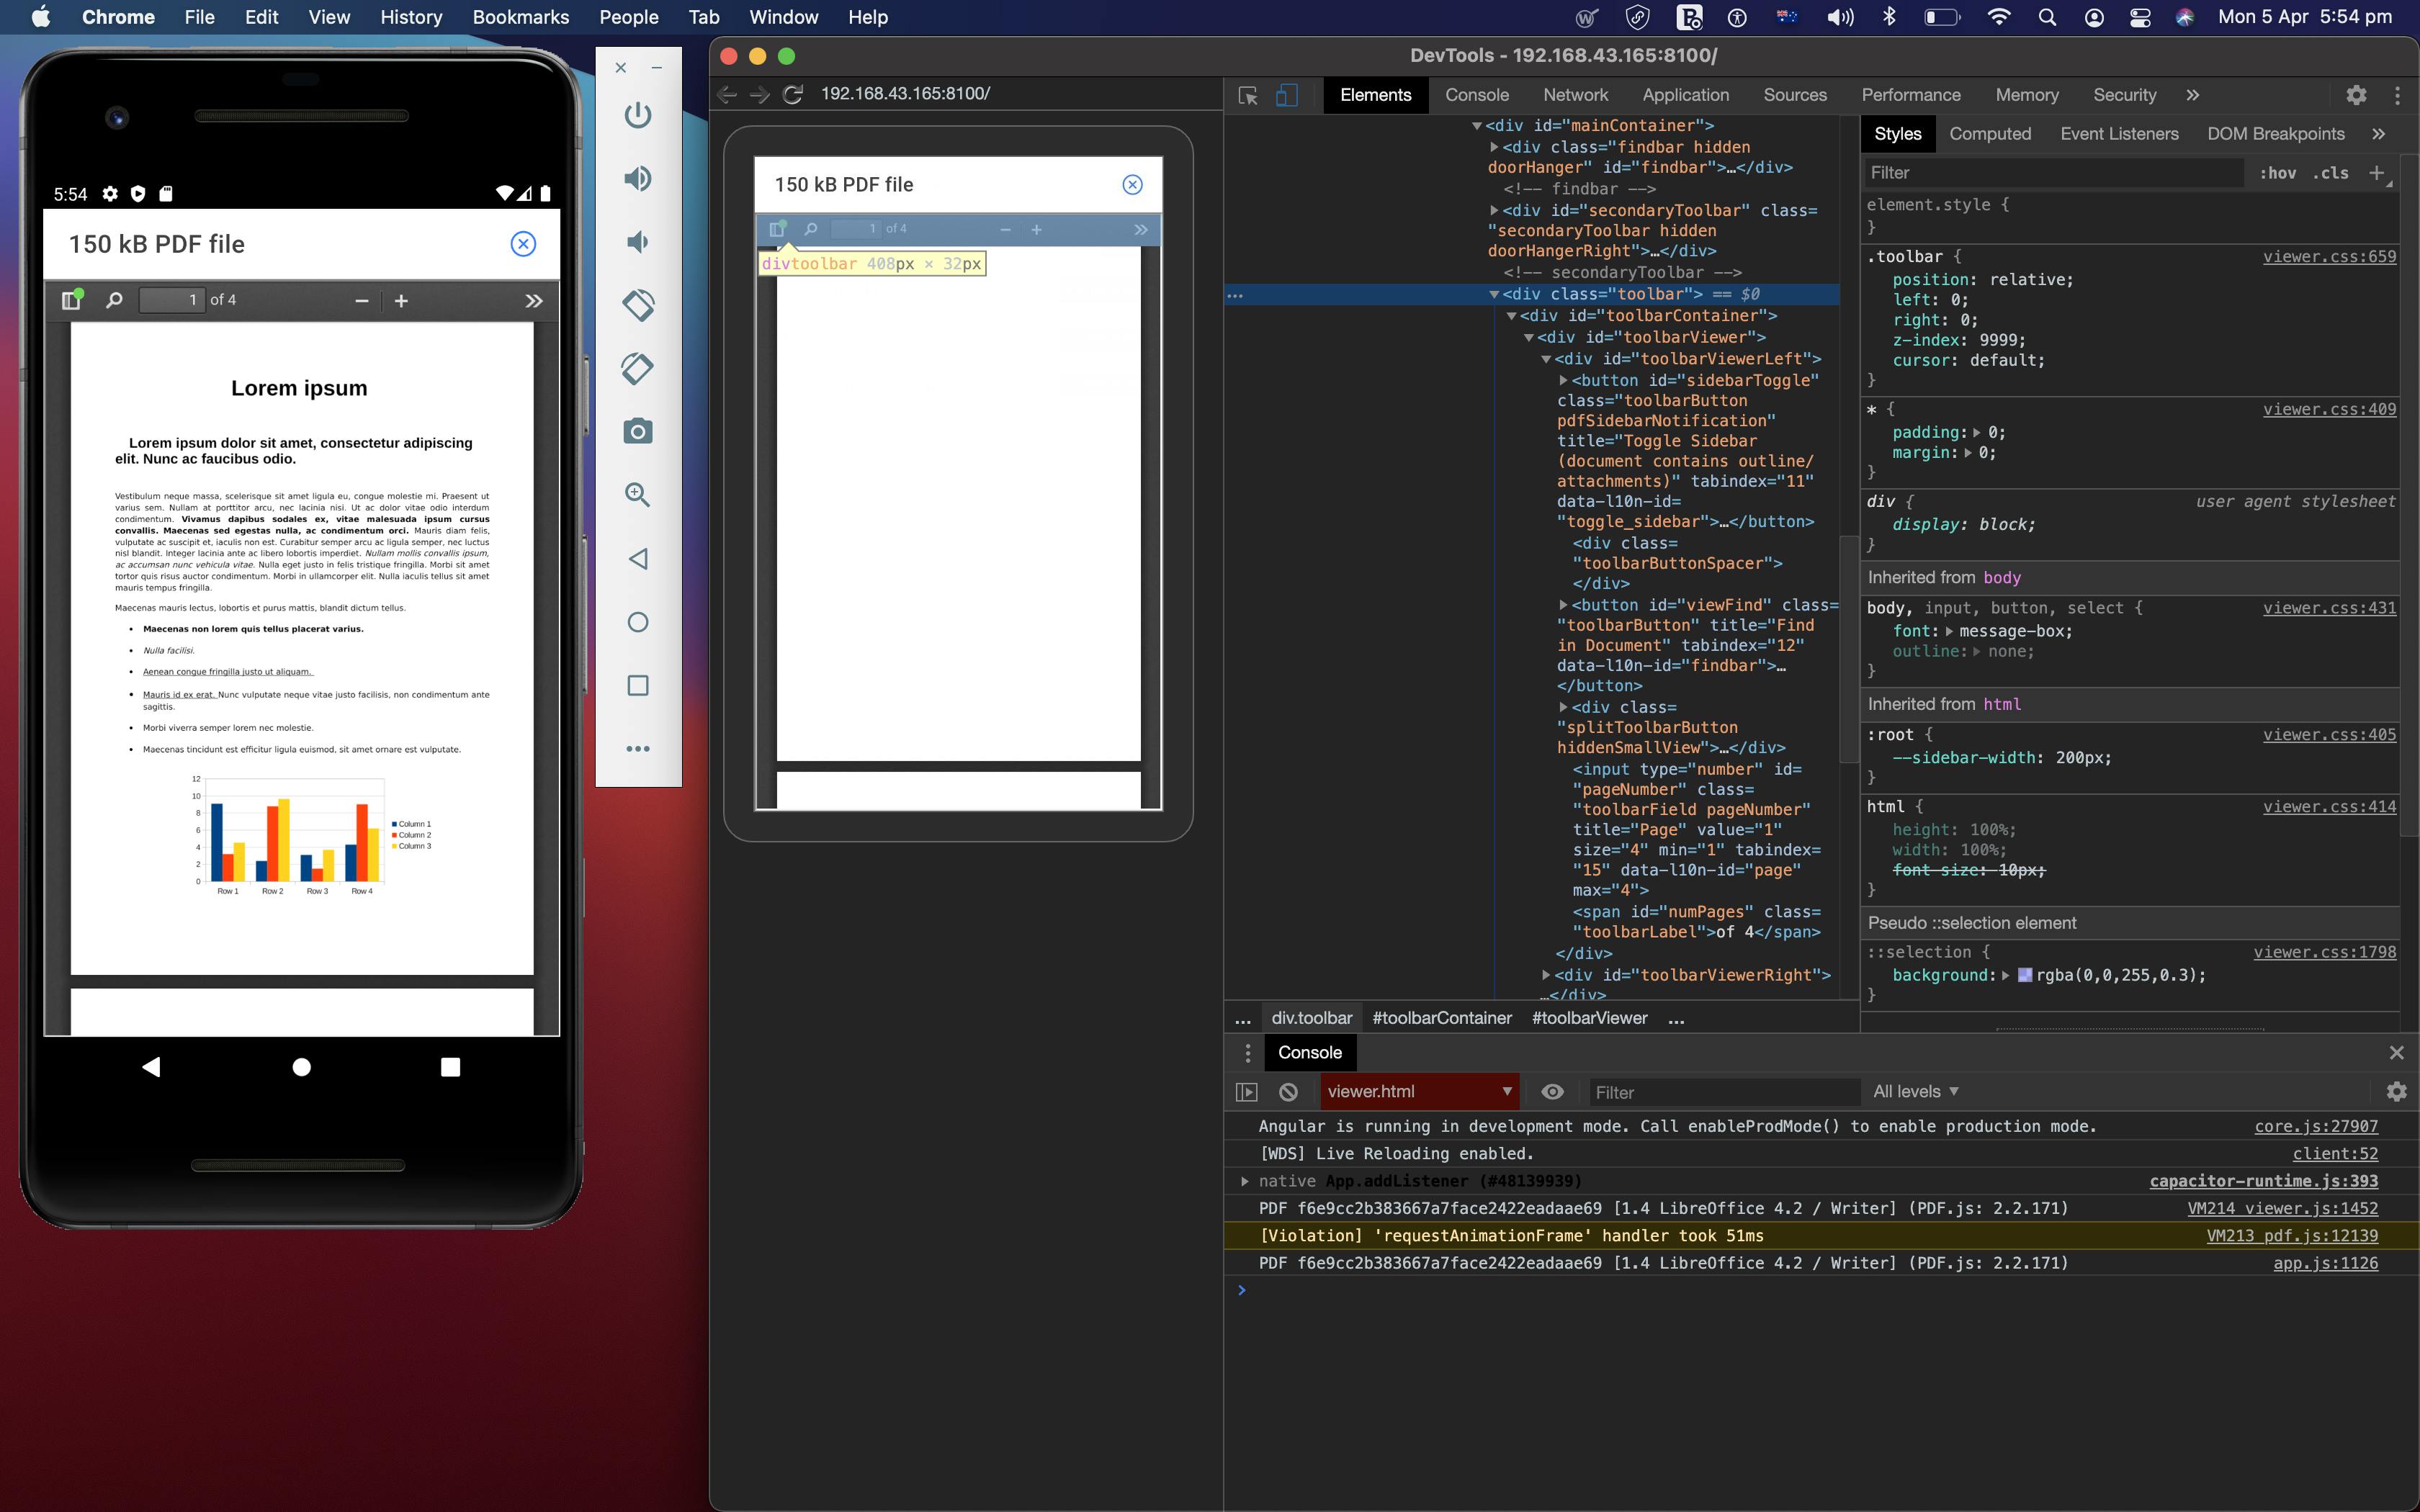 Remote debugging using Chrome DevTools running the app on Android simulator